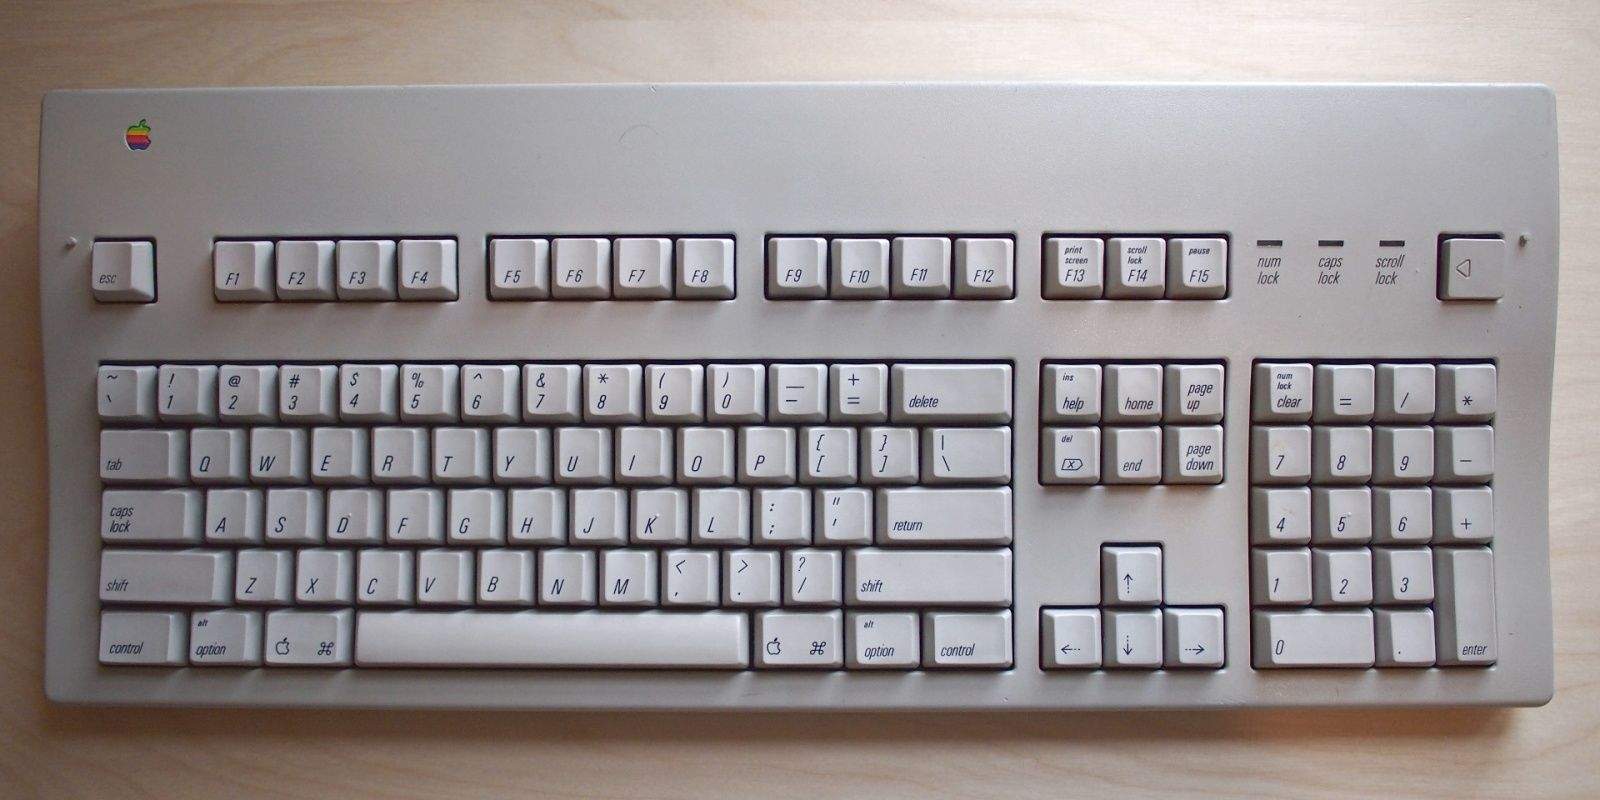 You can turn your Apple Extended Keyboard into a full computer.